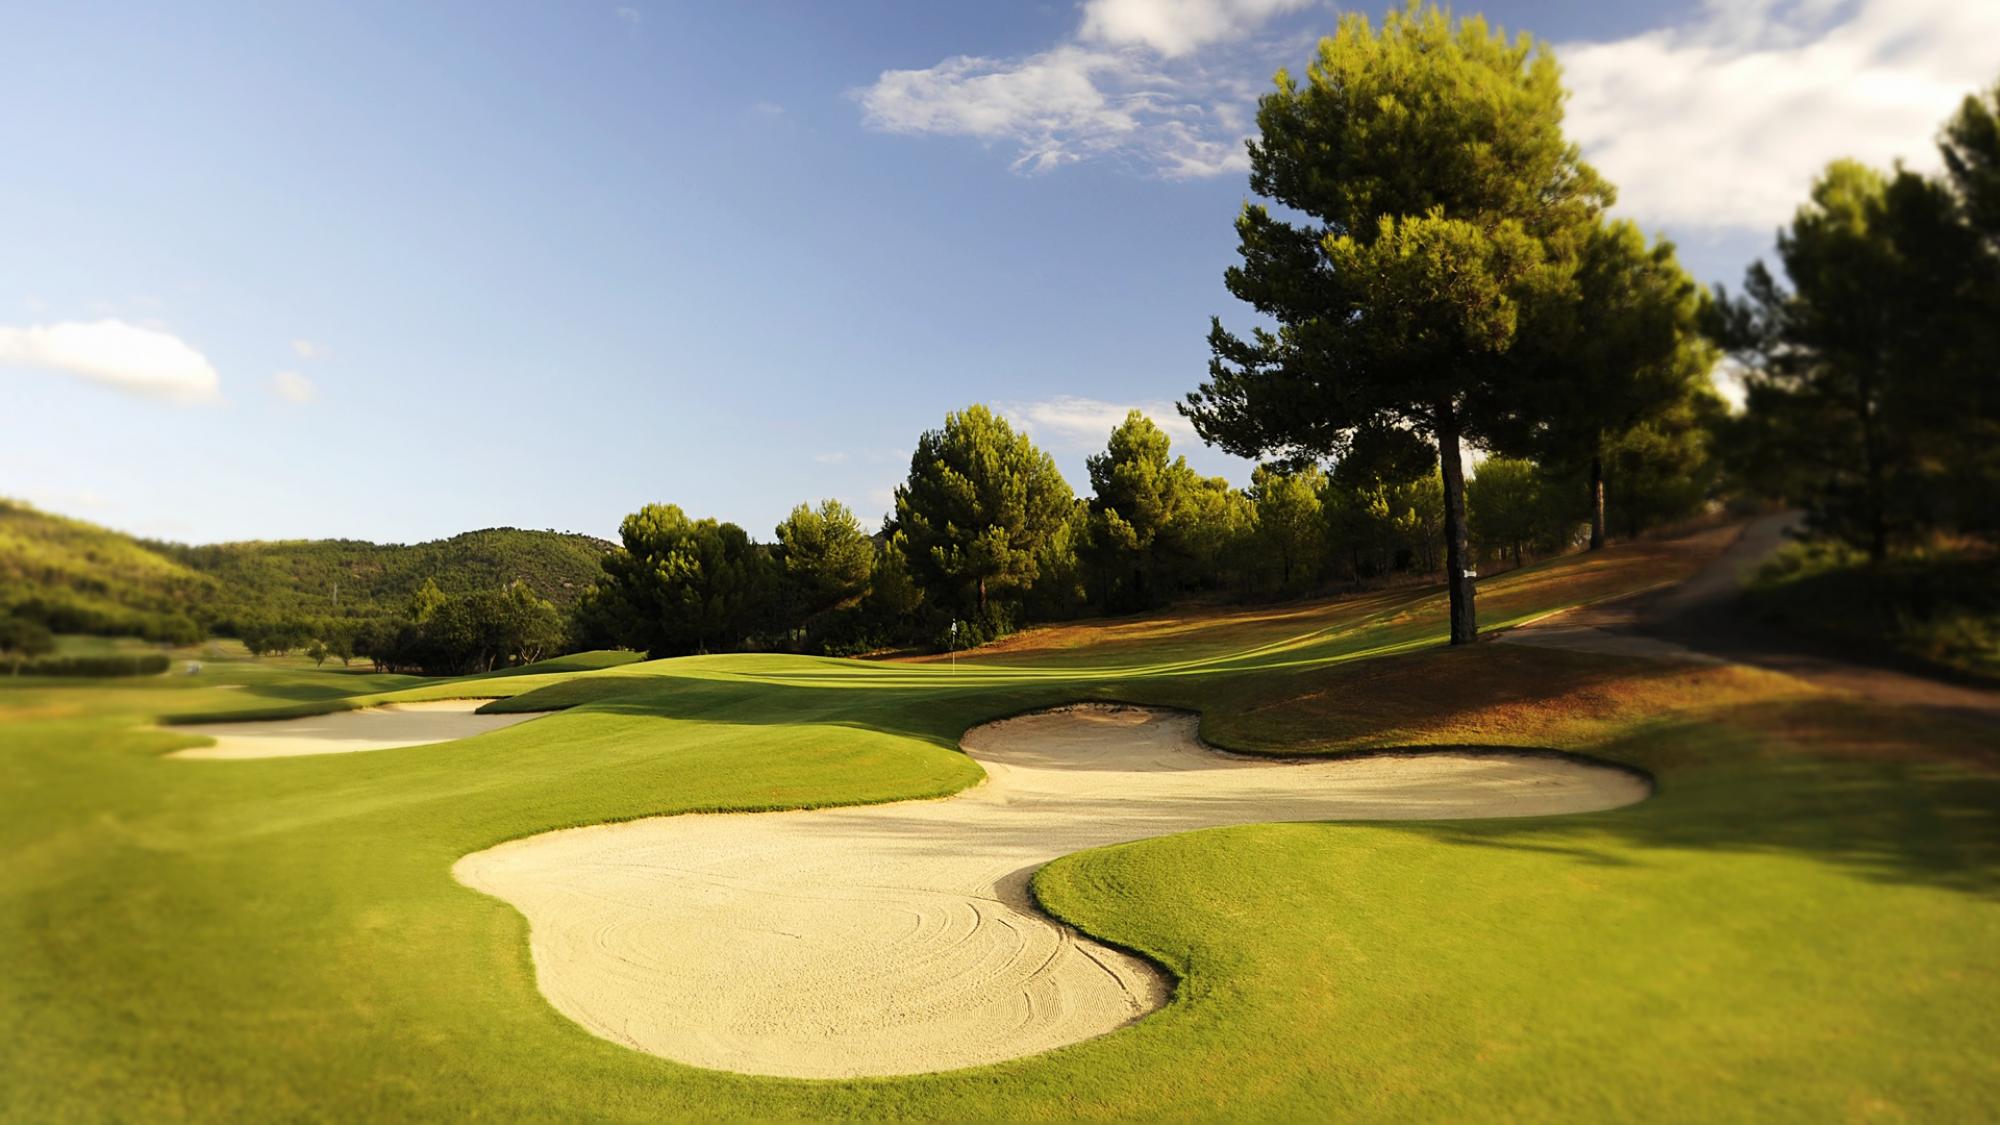 The Golf Son Quint's beautiful golf course within amazing Mallorca.